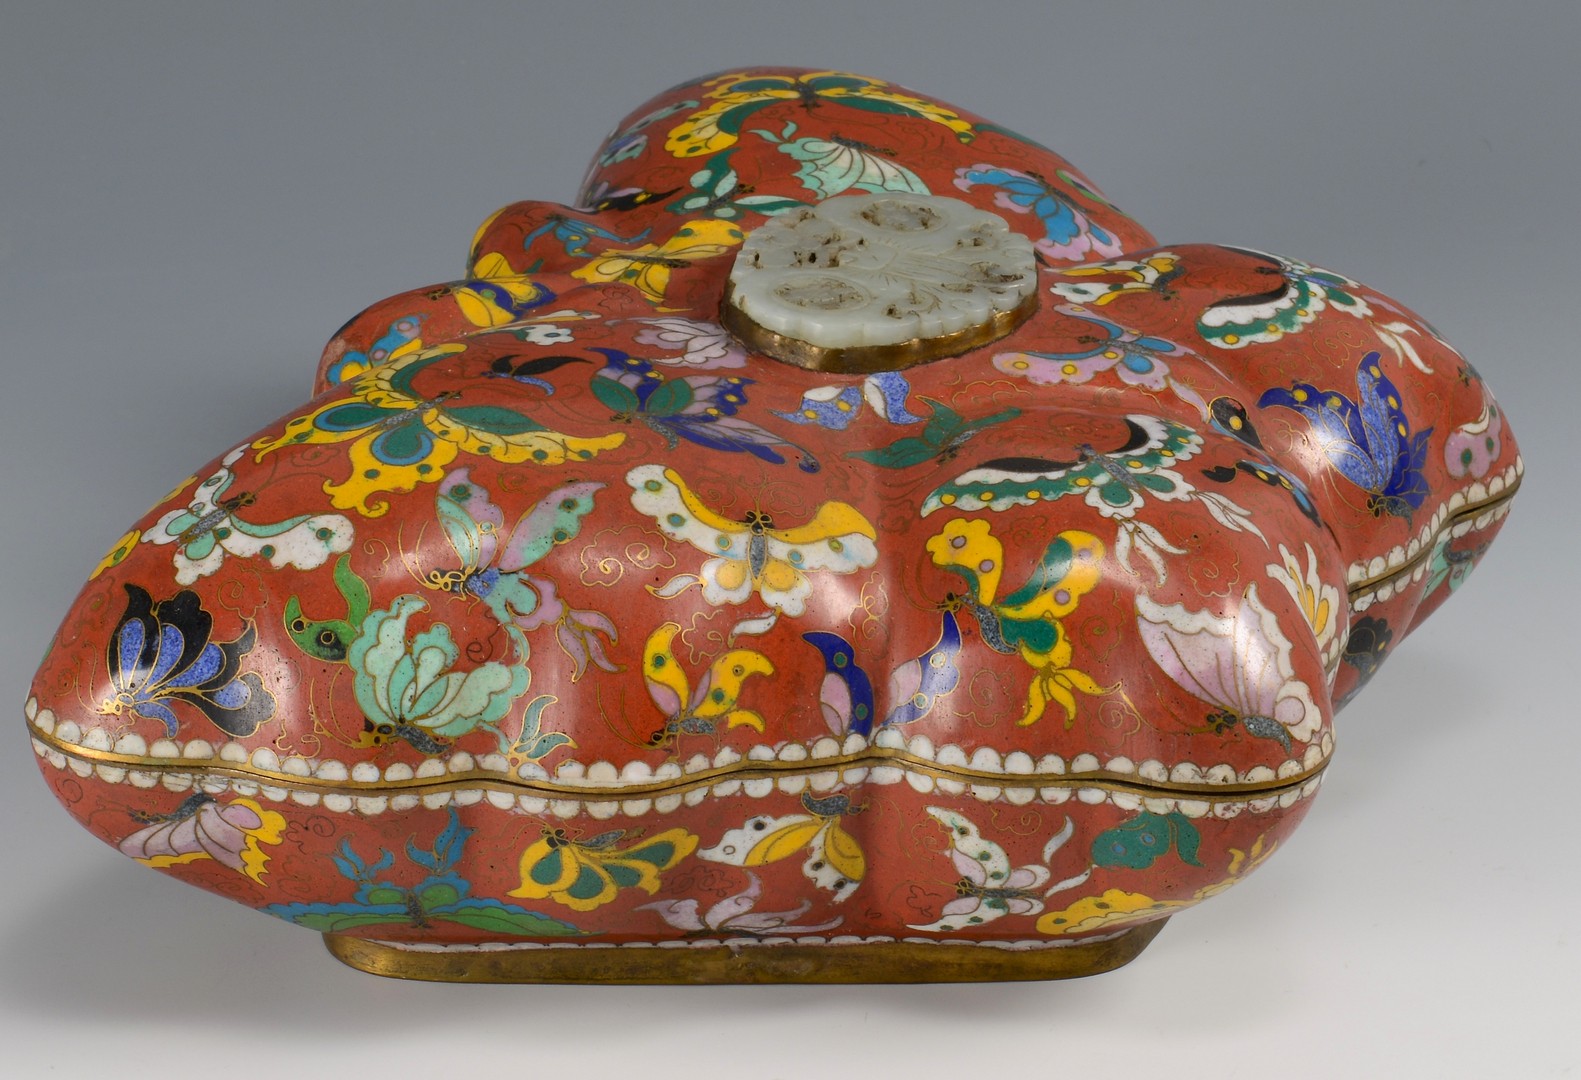 Lot 9: Chinese Cloisonne Butterfly Form Box w/ Jade Insert